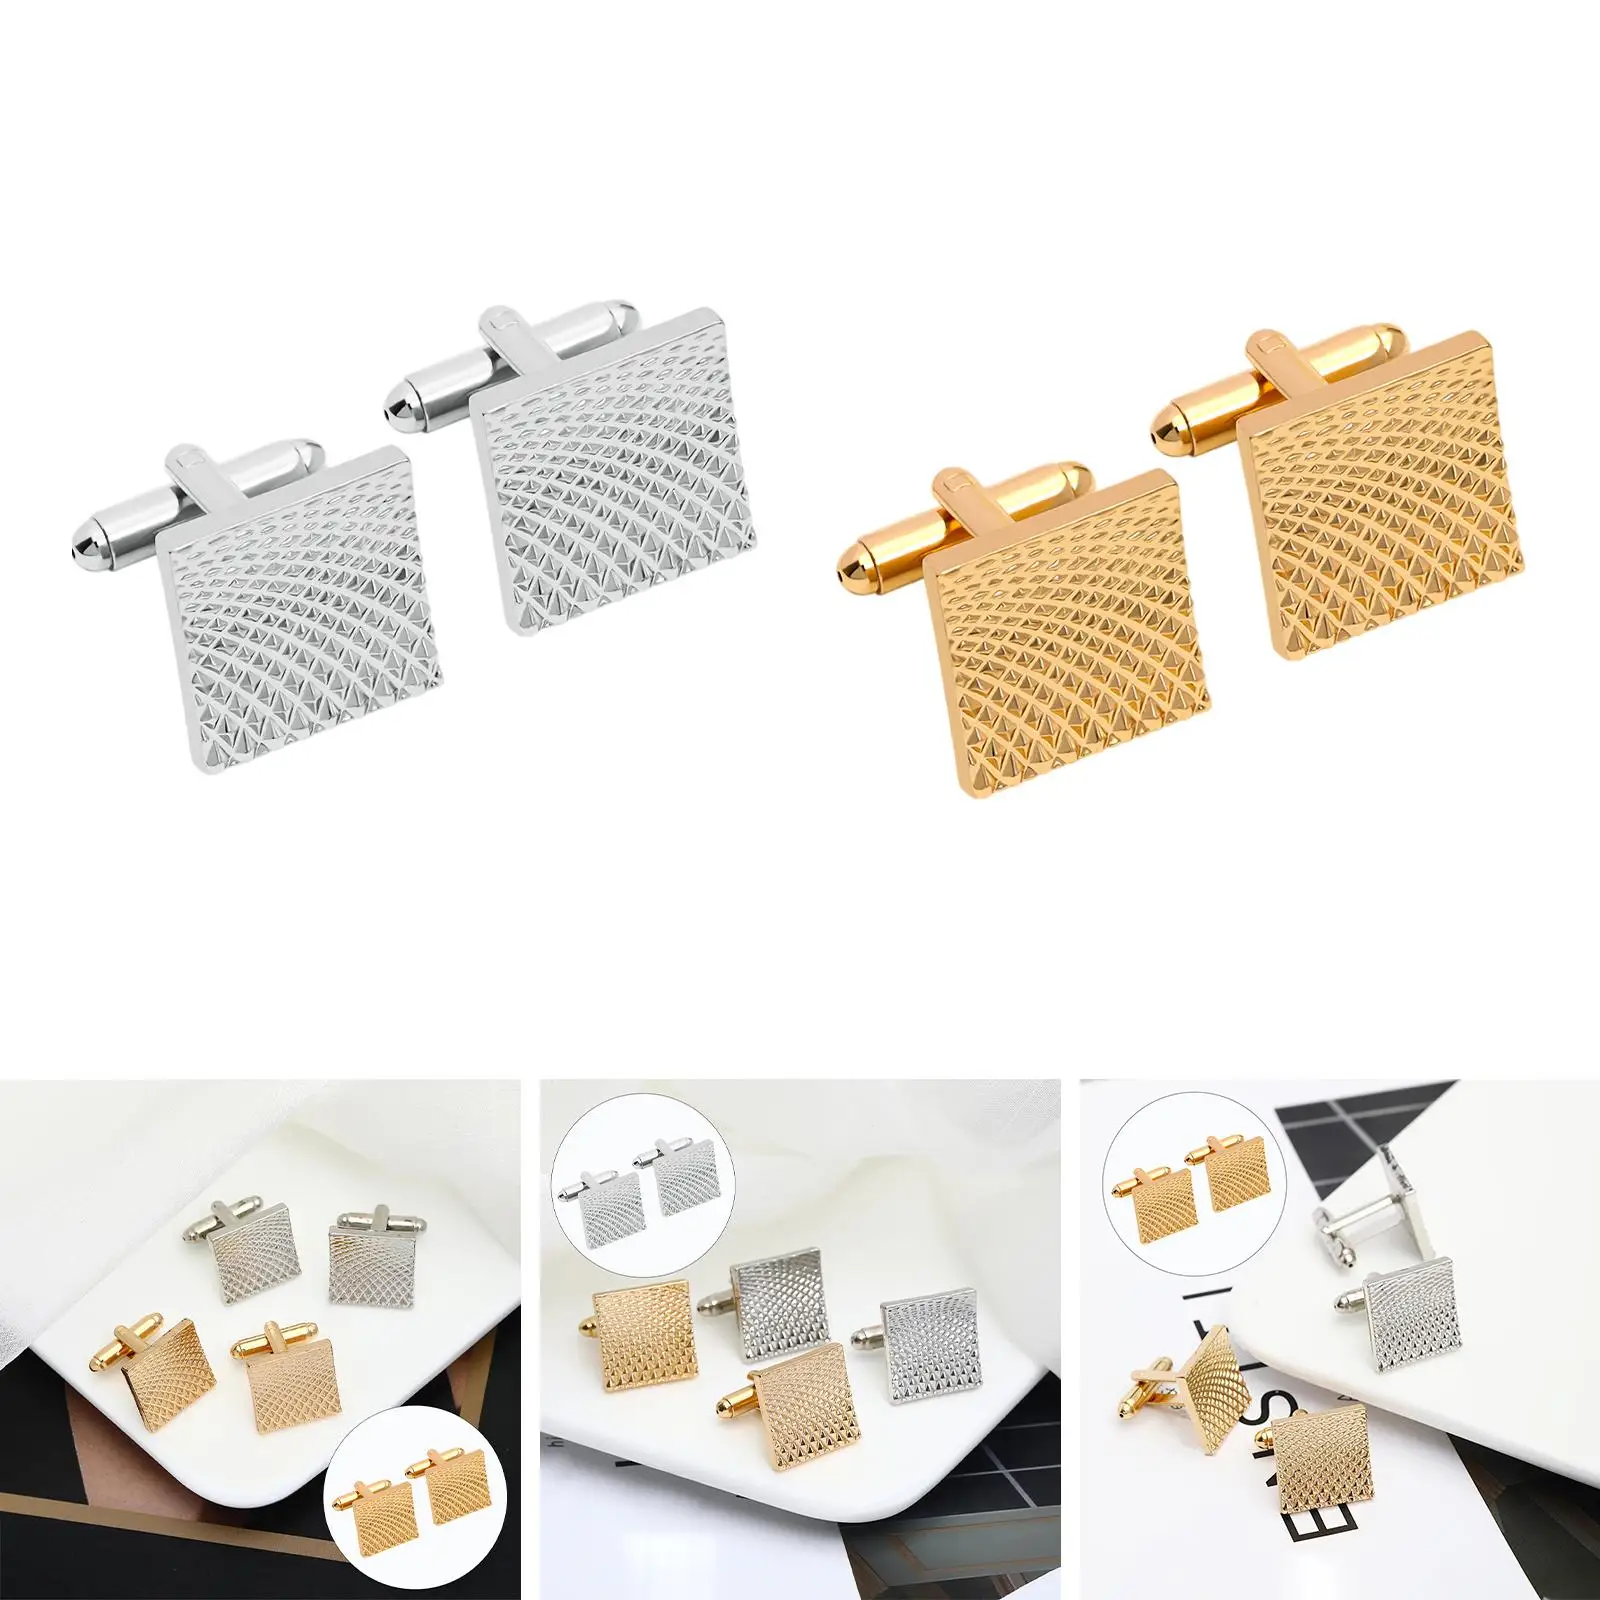 2x Square Cufflinks Sturdy Stylish Polished Business Style Delicate Cuff Links for Shirt Wedding Suits Professional Meeting